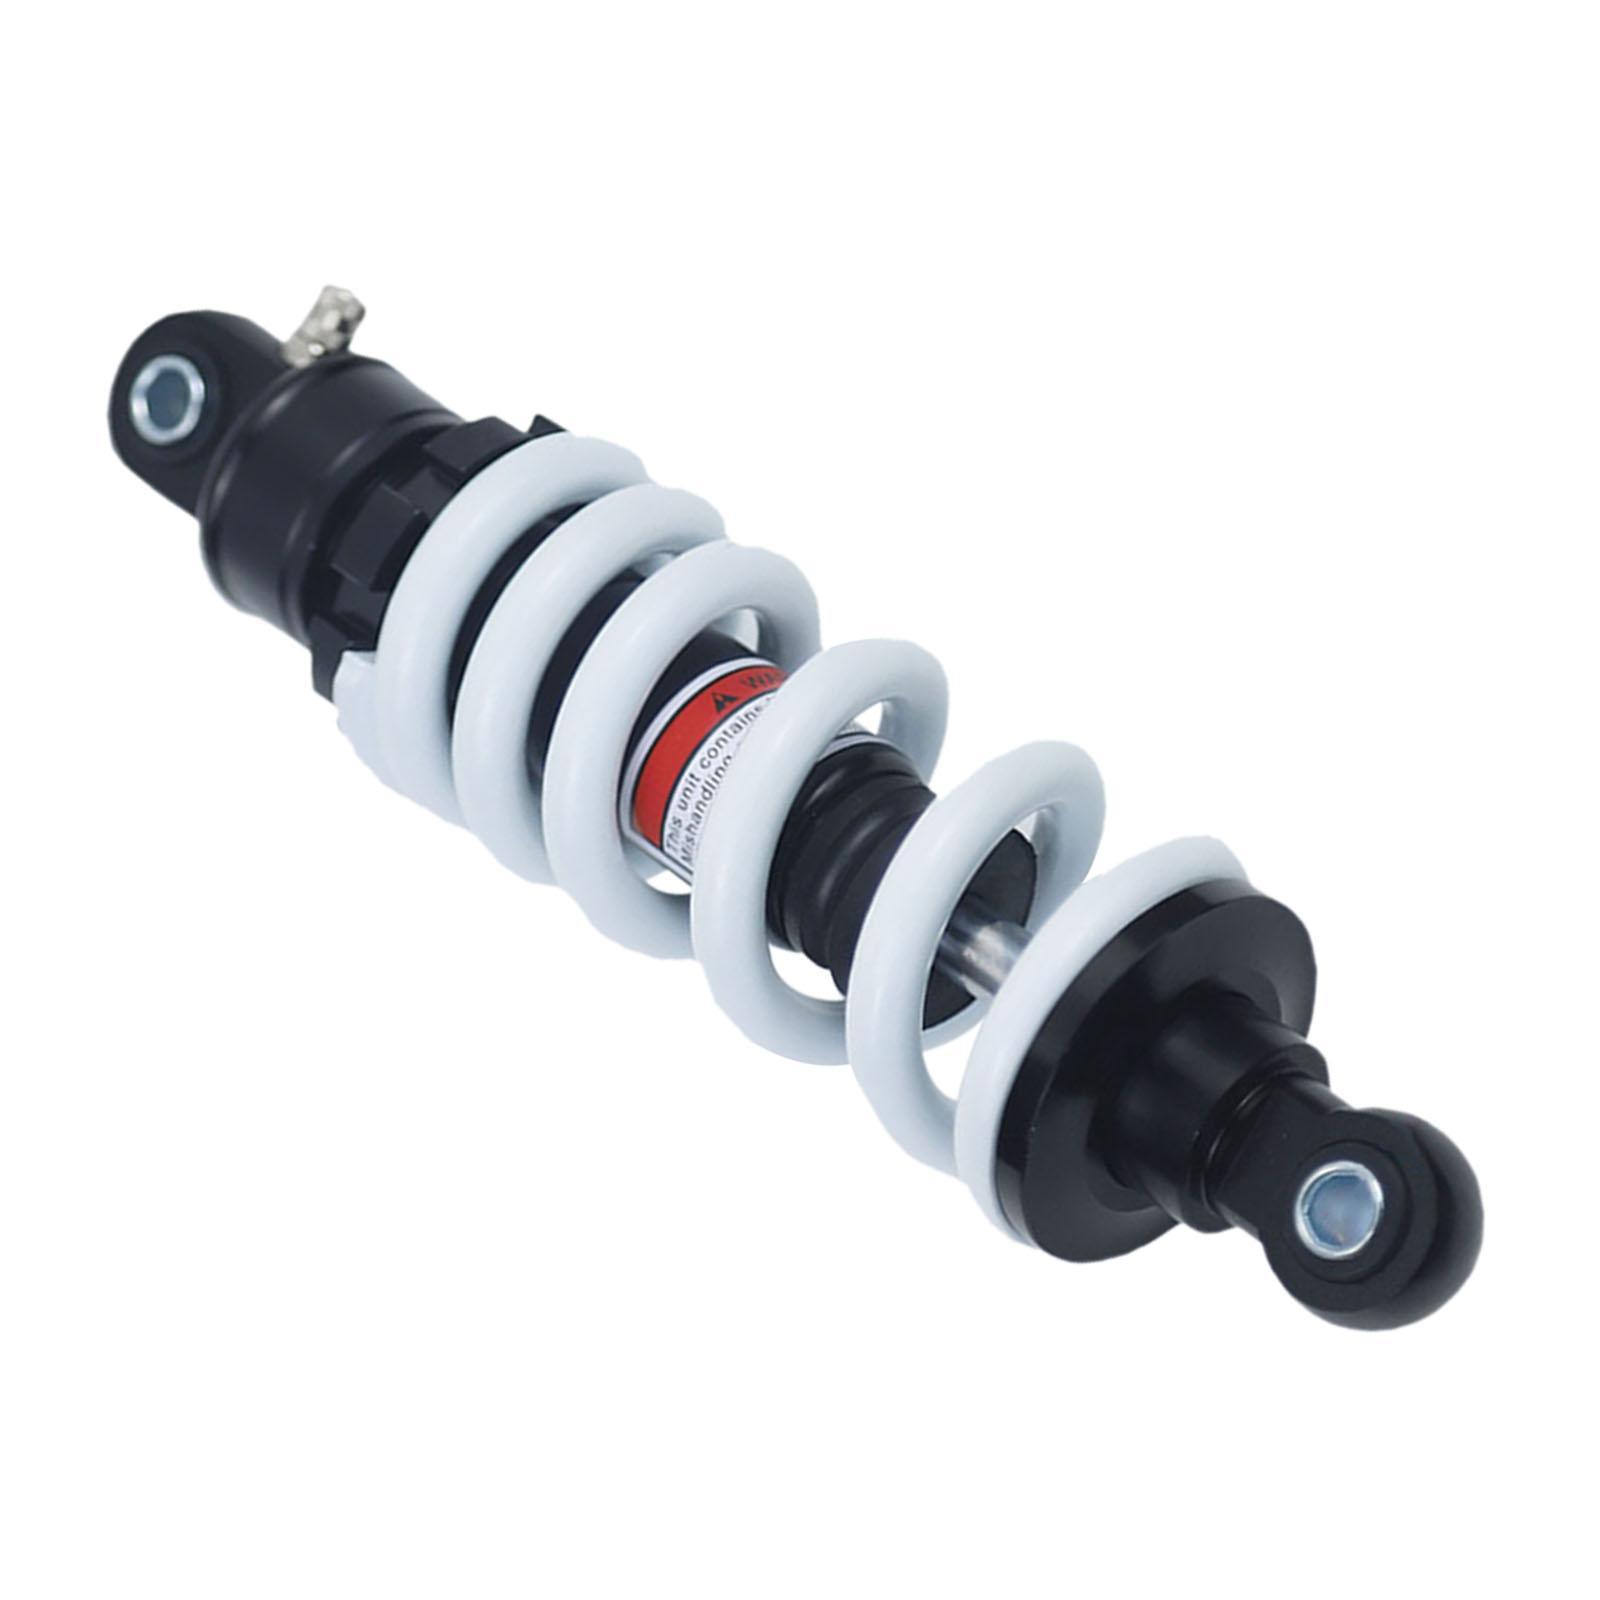 Rear Back Shock Absorber Spare Parts for Dirt Bike ATV Motorcycle